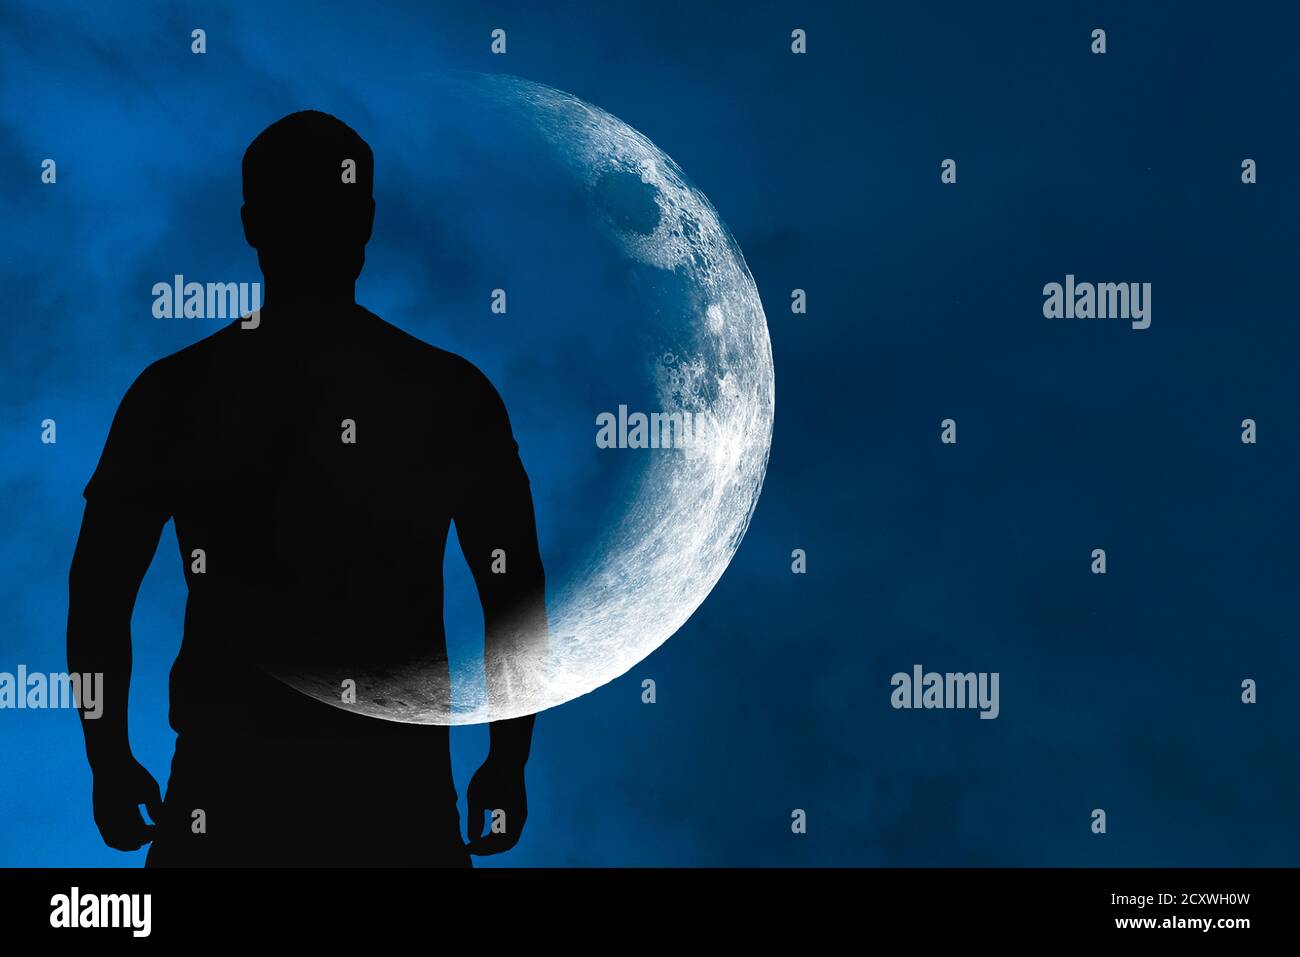 Silhouette of man with transparent crescent or moon on body in front blue sky during night, concept picture about space, astronomy and astrology Stock Photo